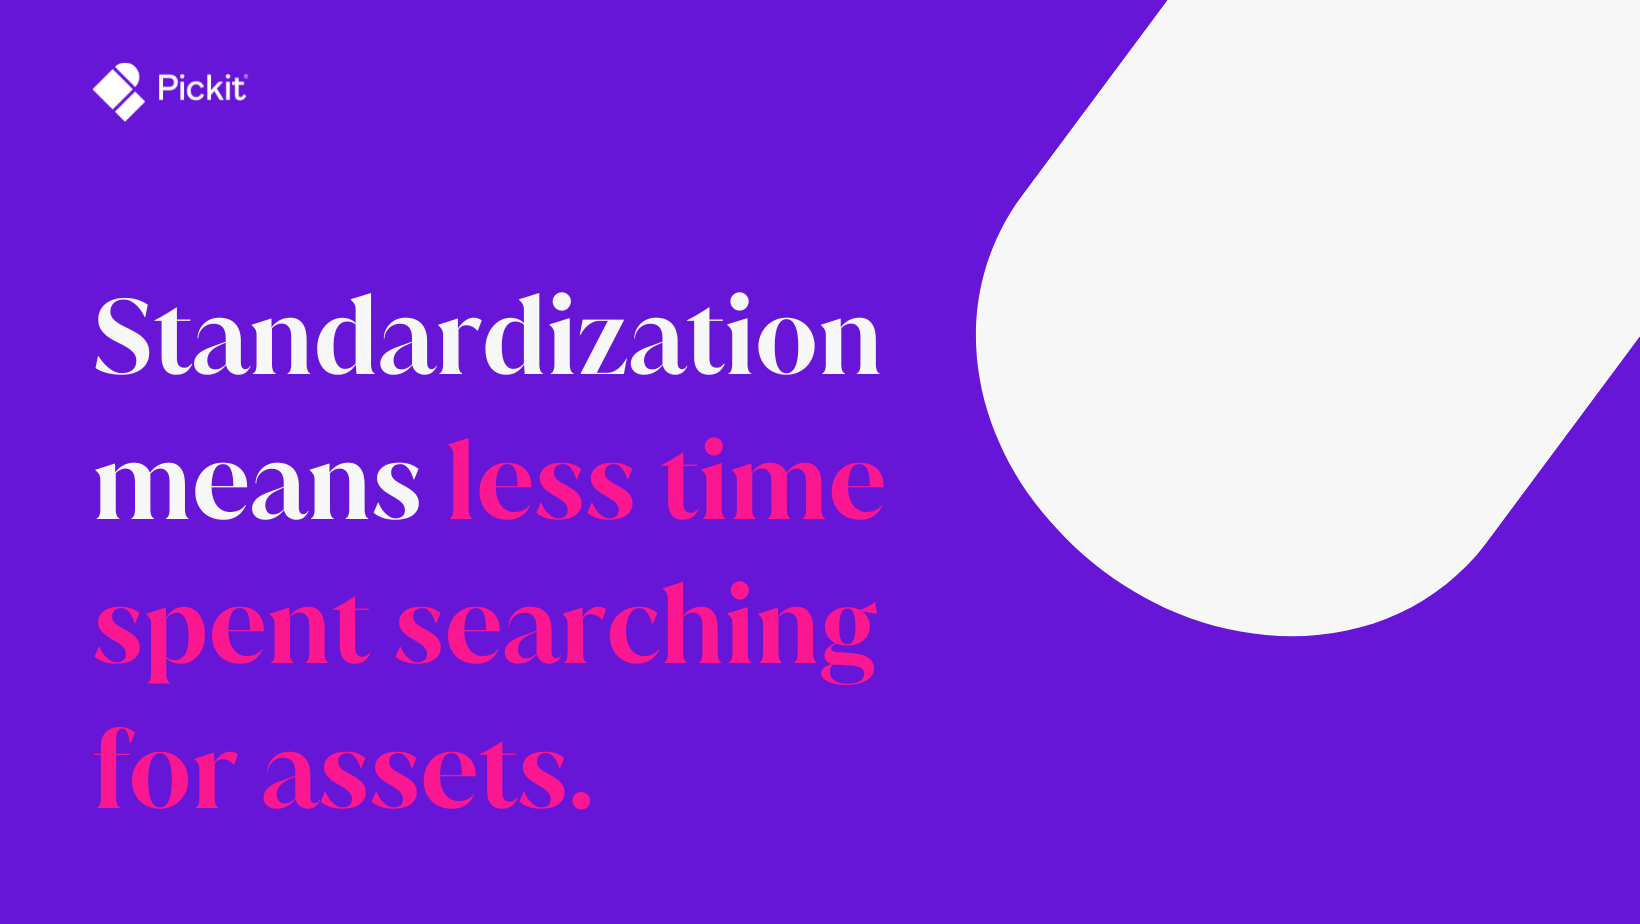 Image is a pull quote that says "standardization means less time spent searching for assets."